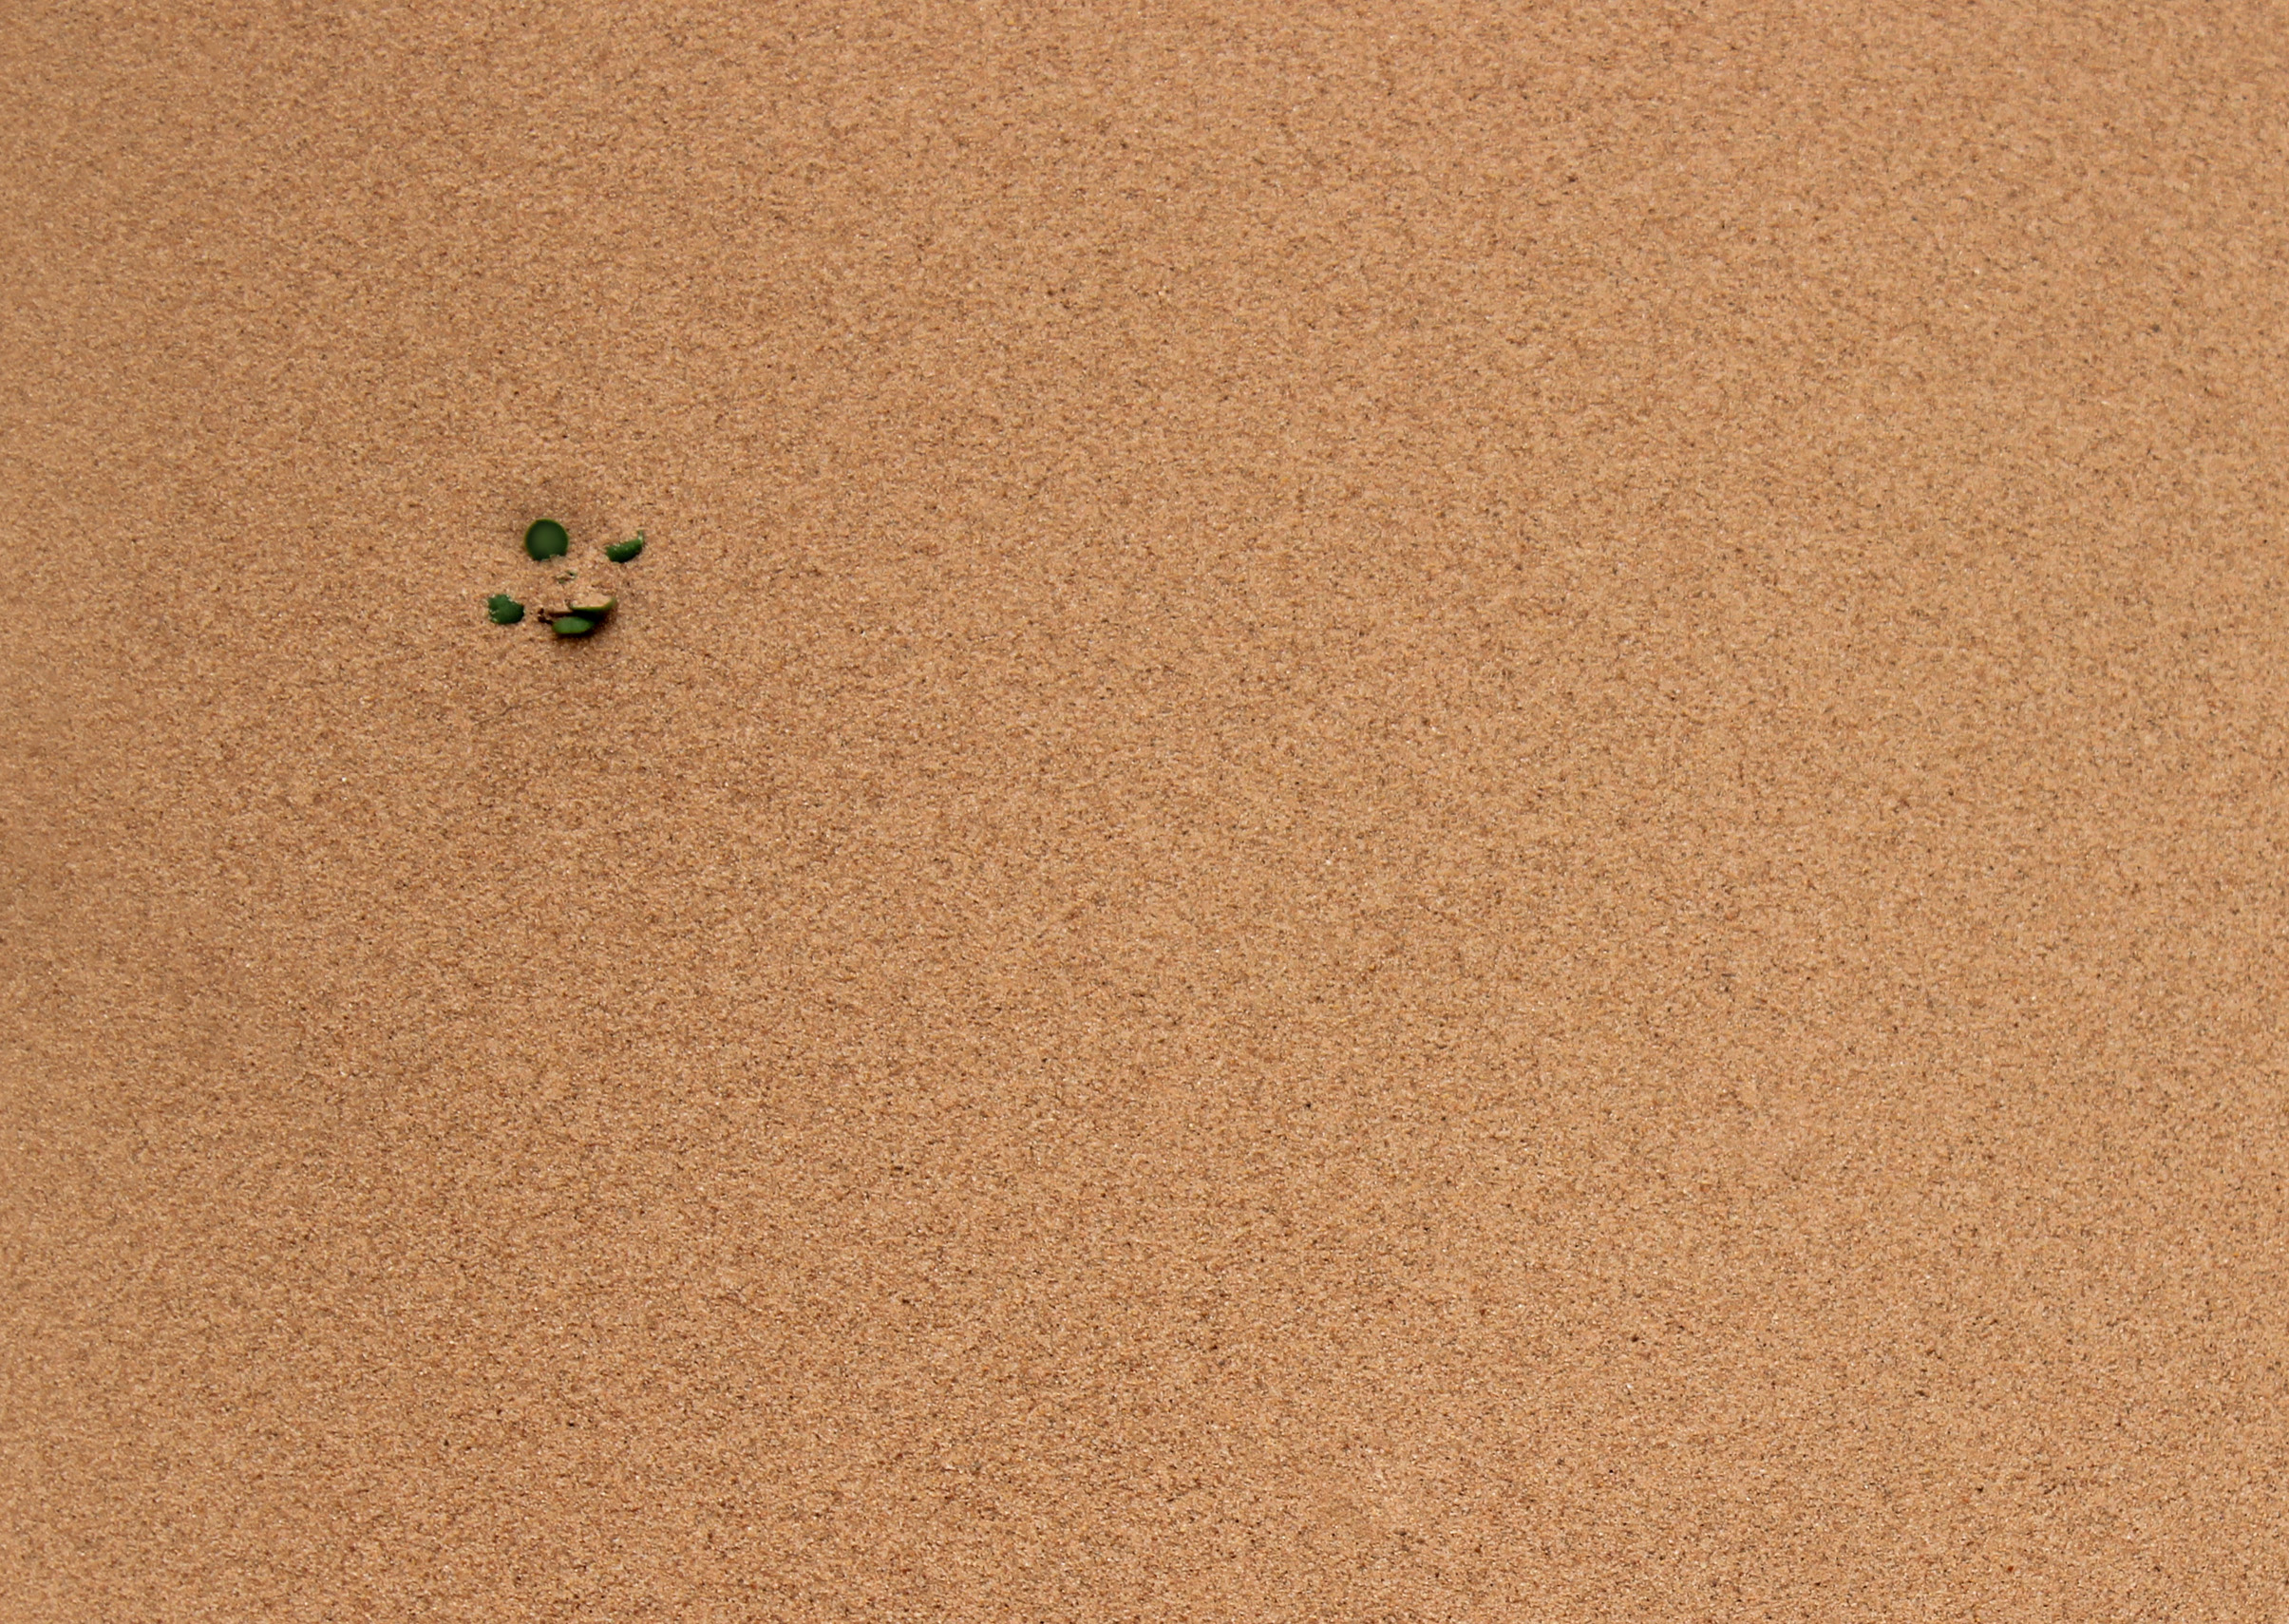 Little plant growing on sand - background photo